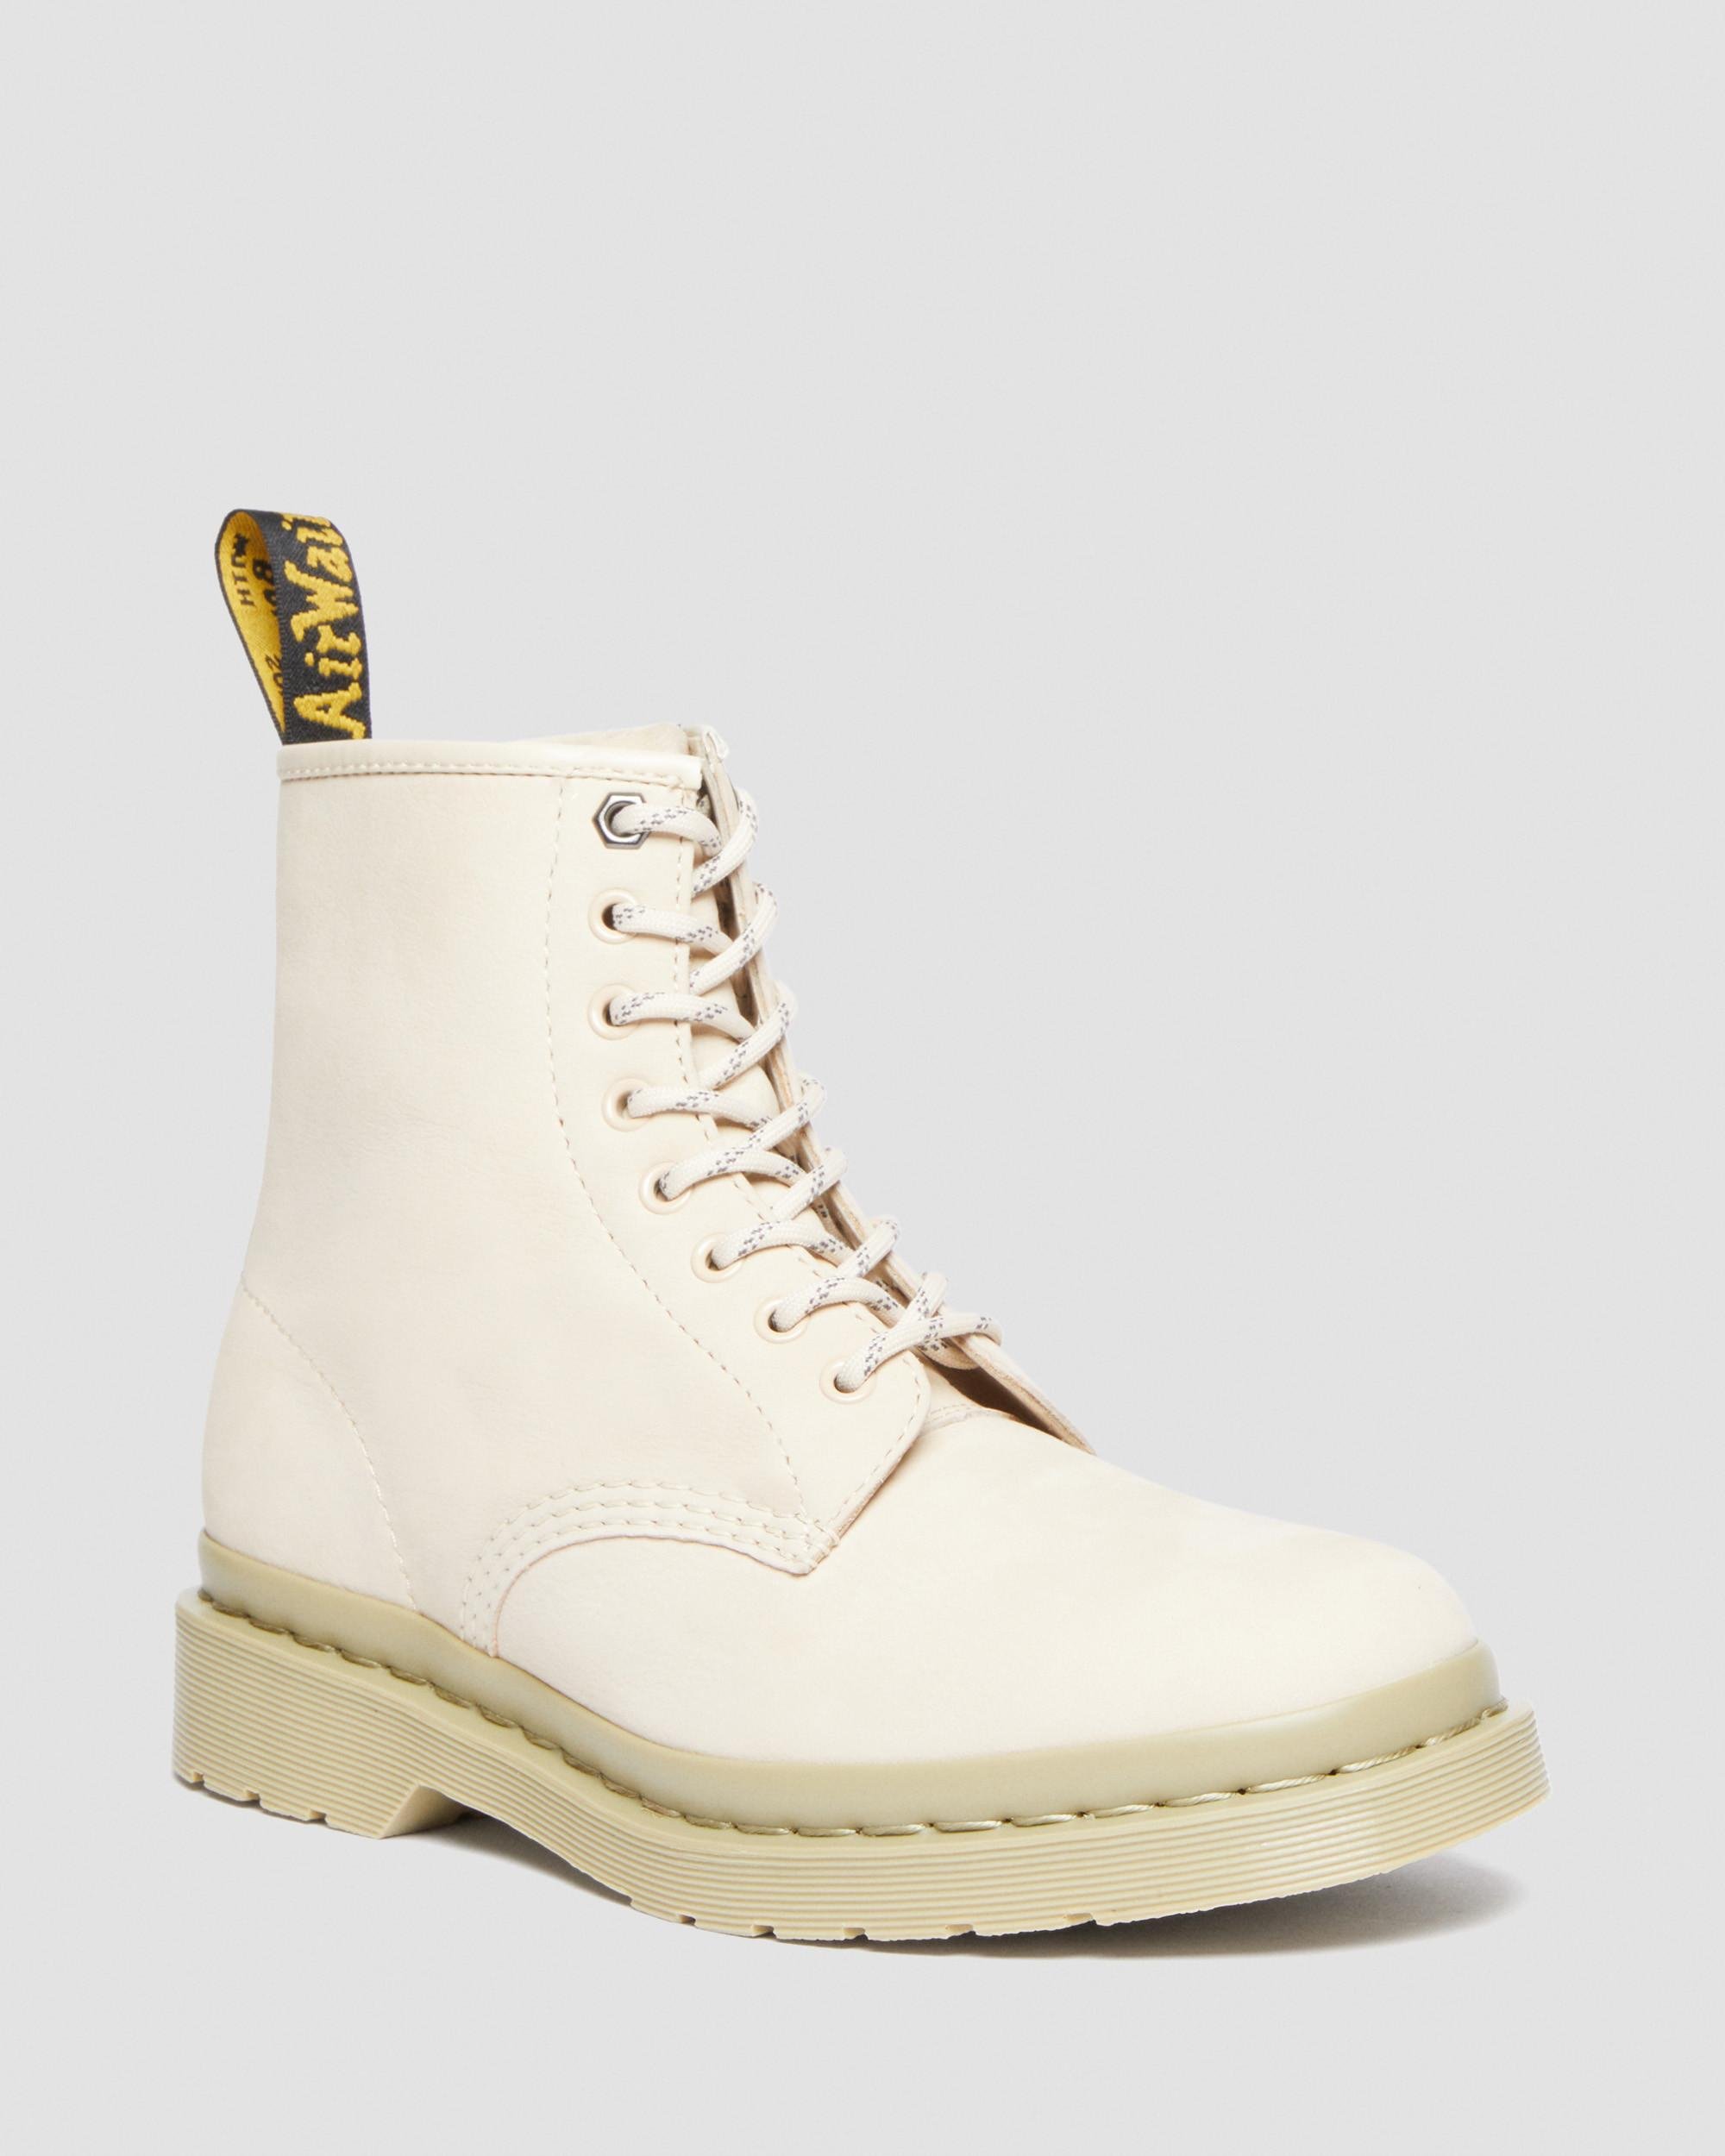 Dr. Martens 1460 Mono Milled Nubuck Leather Lace Up Boots in Natural | Lyst